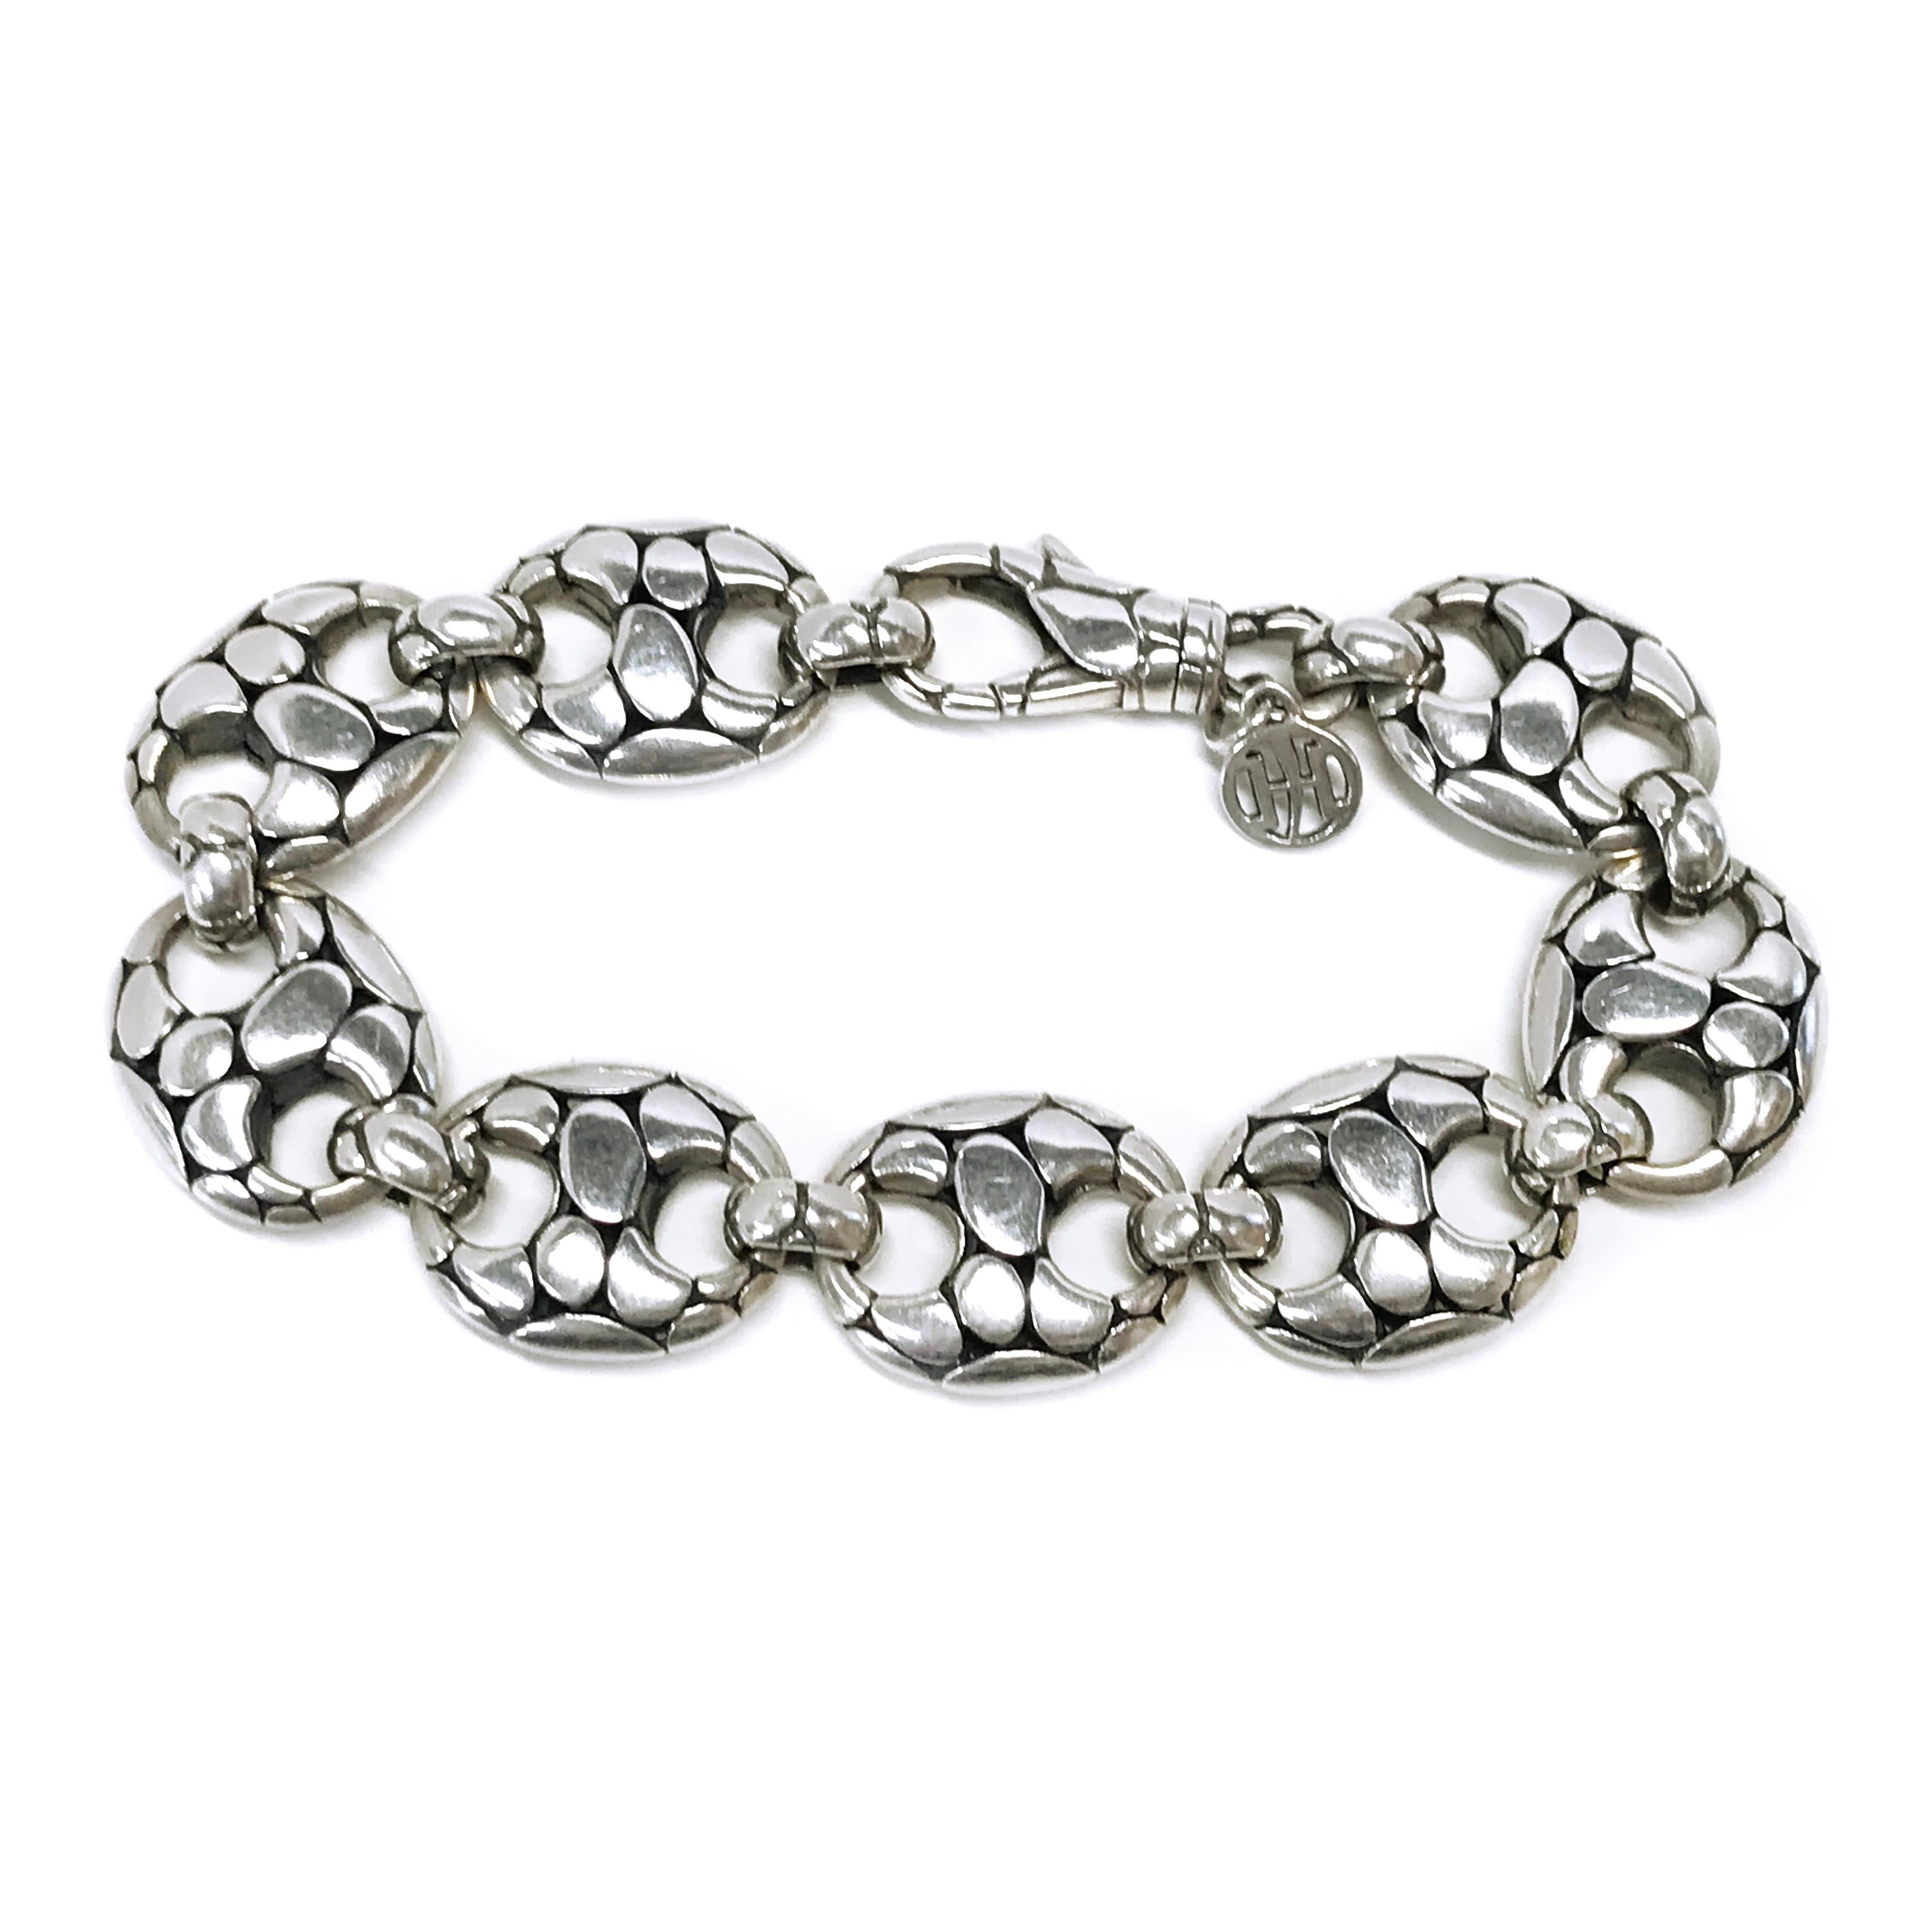 John Hardy Sterling Silver Kali Pebble Bracelet. The bracelet has nine oval links and a lobster clasp closure with the John Hardy logo detail. The bracelet measures approximately 7